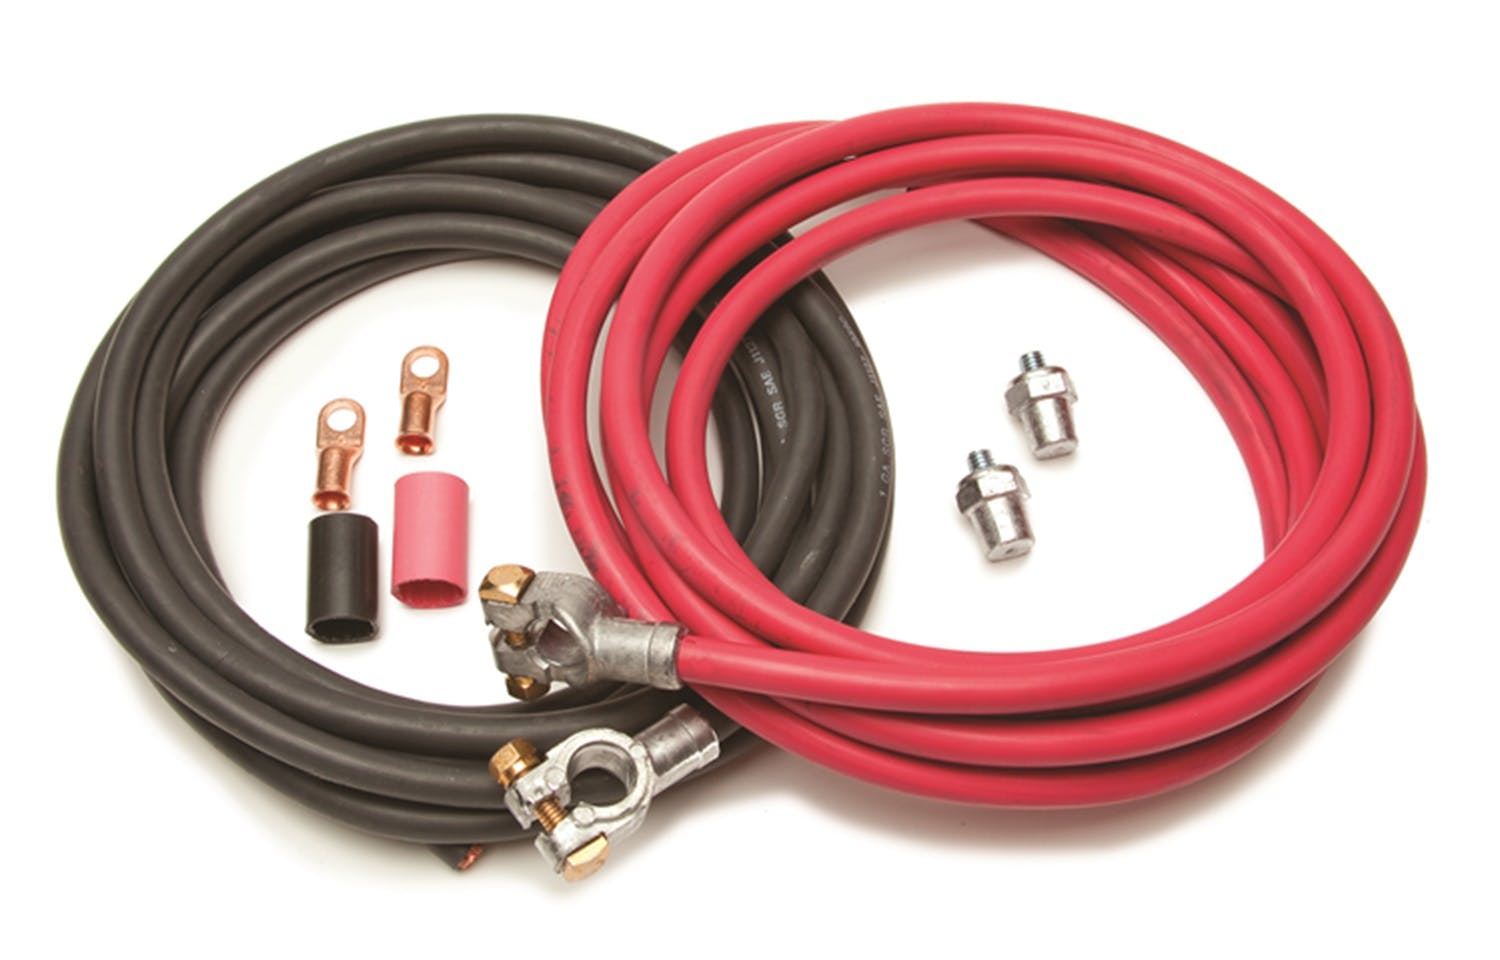 Painless 40105 Battery Cable Kit (16ft. Red/16ft. Black Cables)